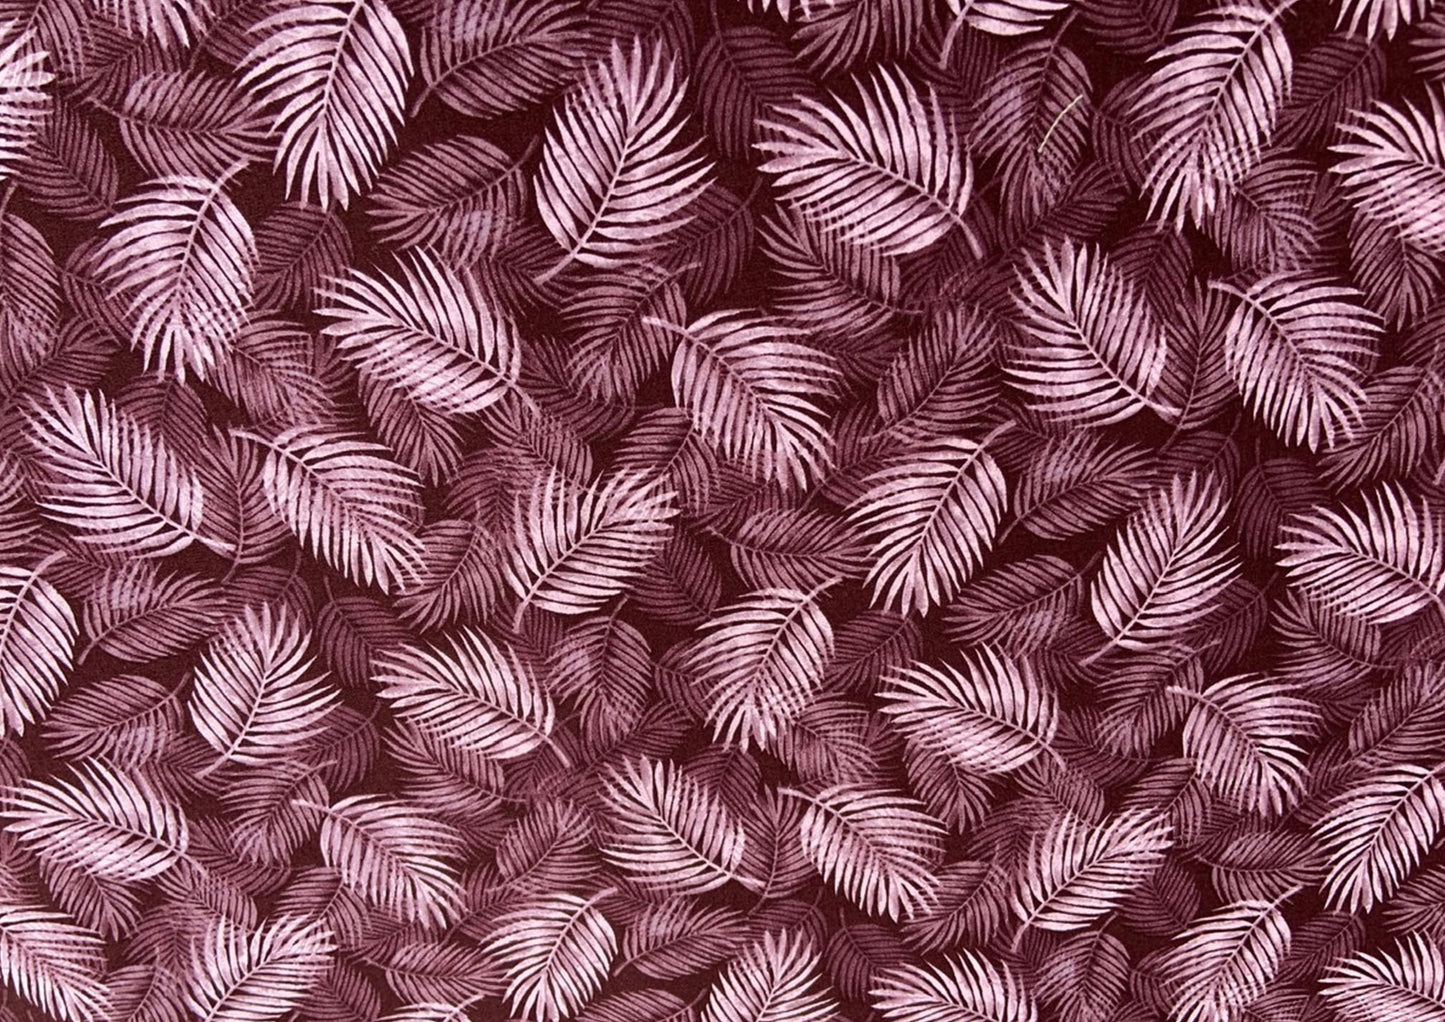 White leaves on maroon, 100% cotton print